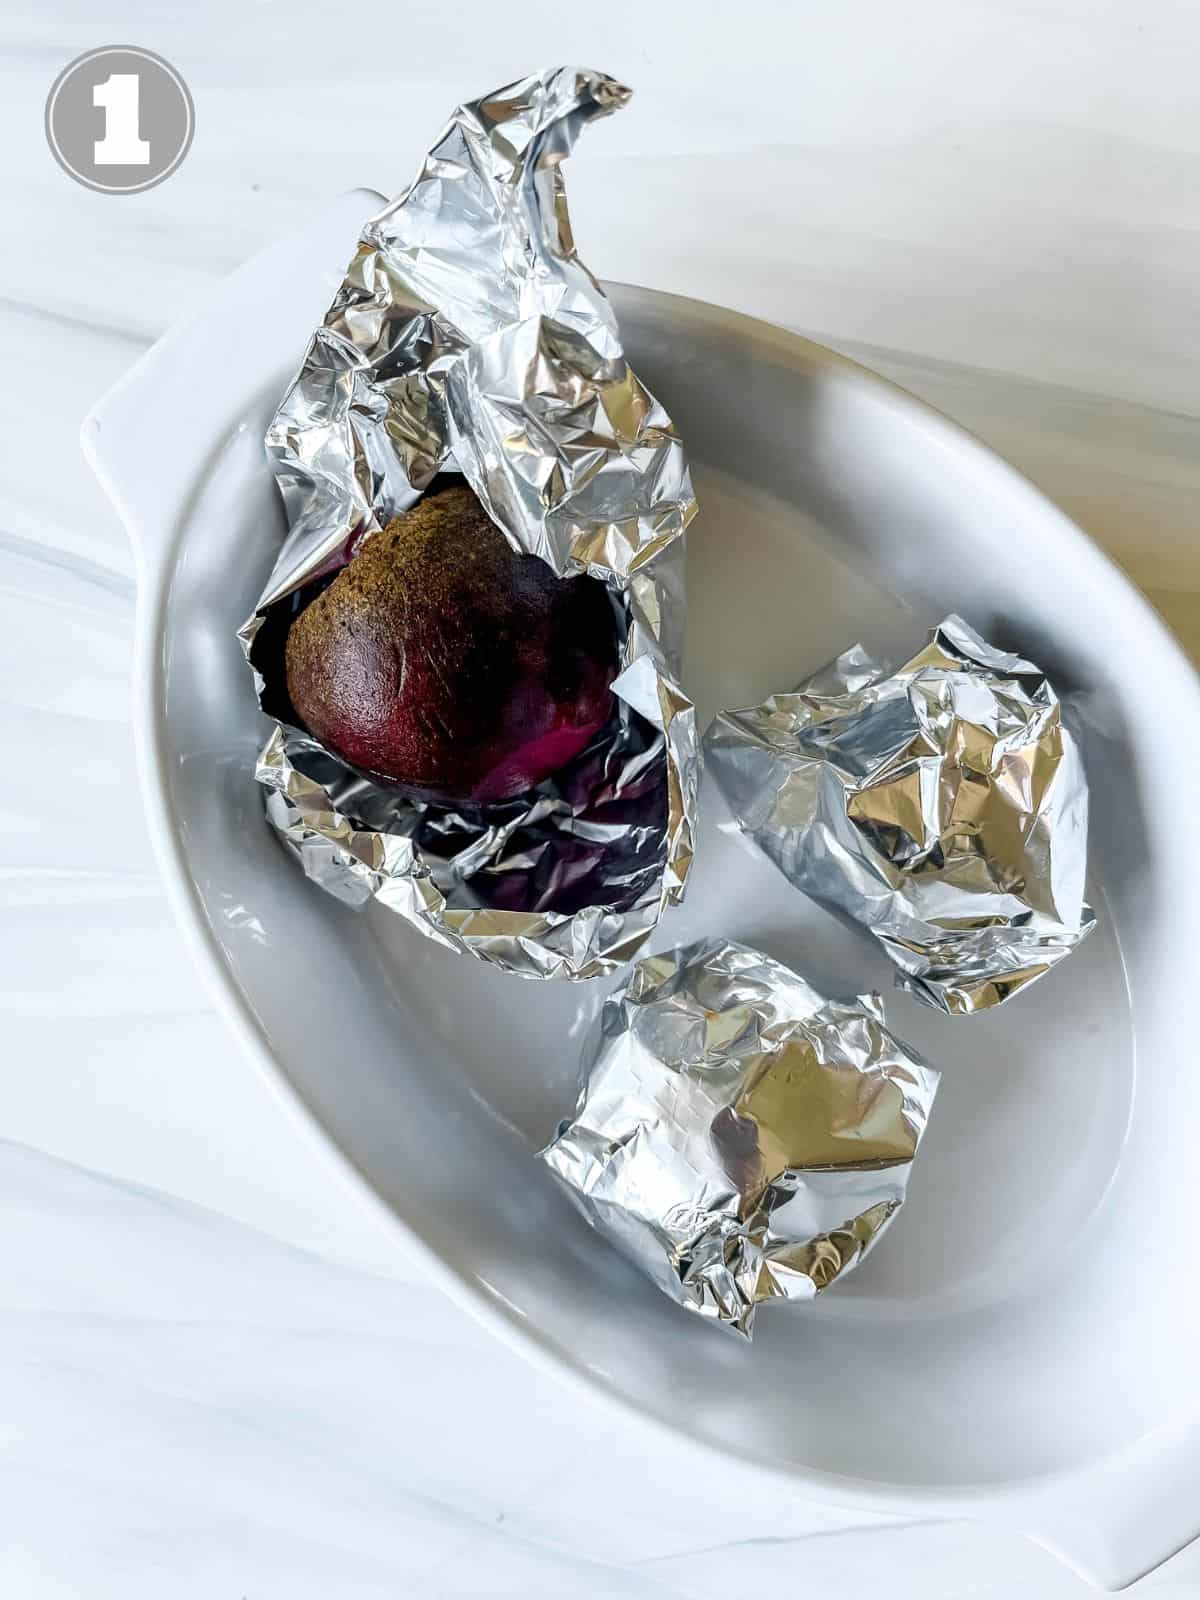 beets wrapped in foil in a white baking dish labelled number one.